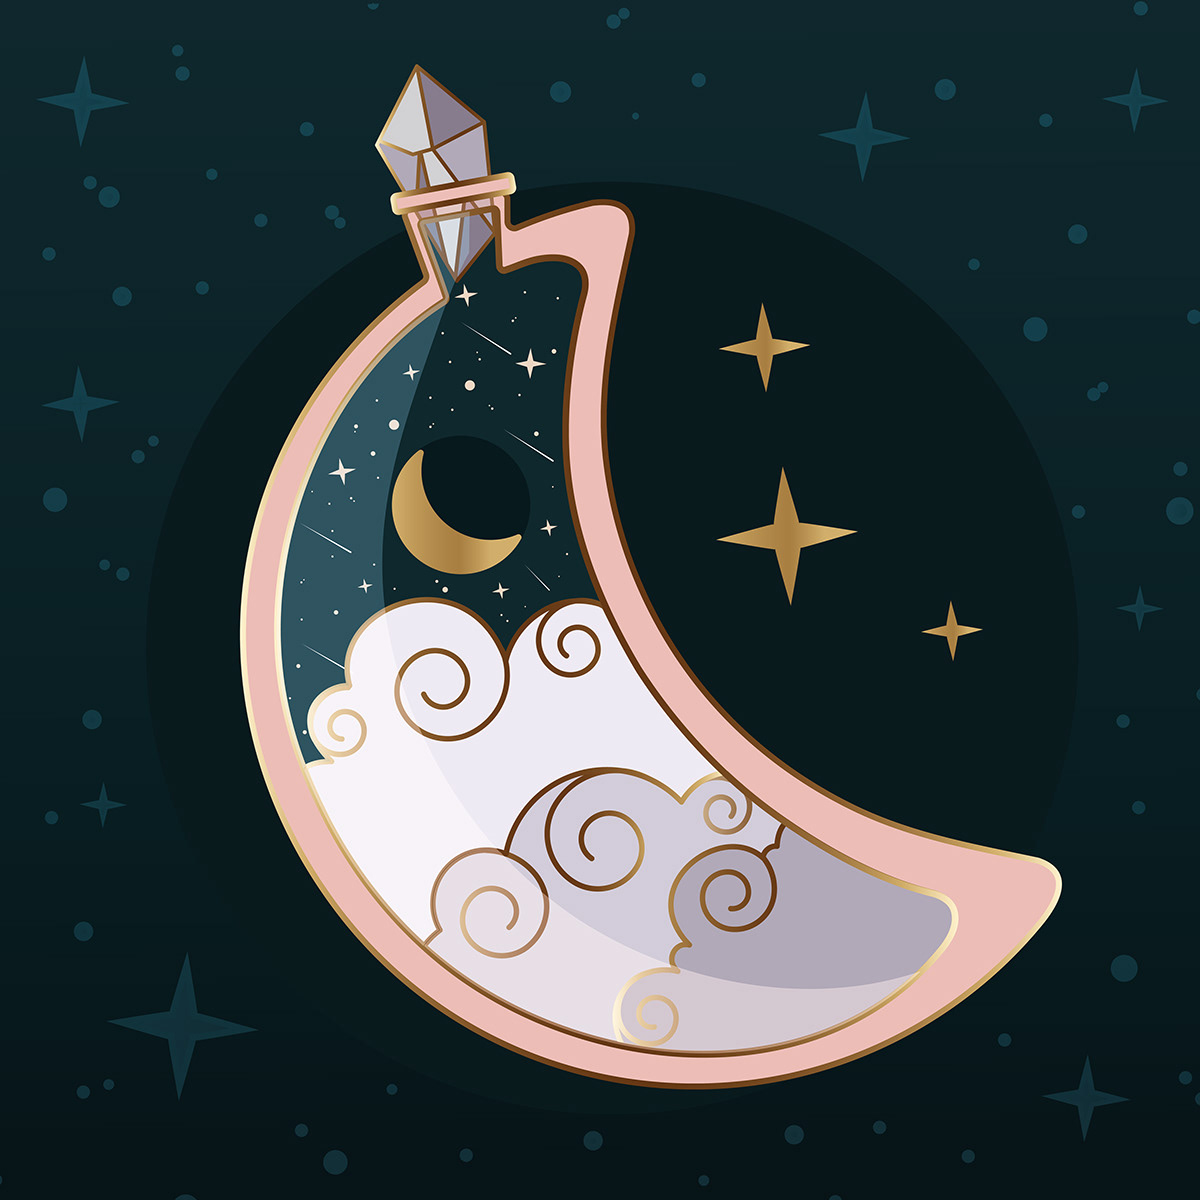 Crescent moon shaped potion bottle capped with a crystal. Containing the night sky, clouds moon